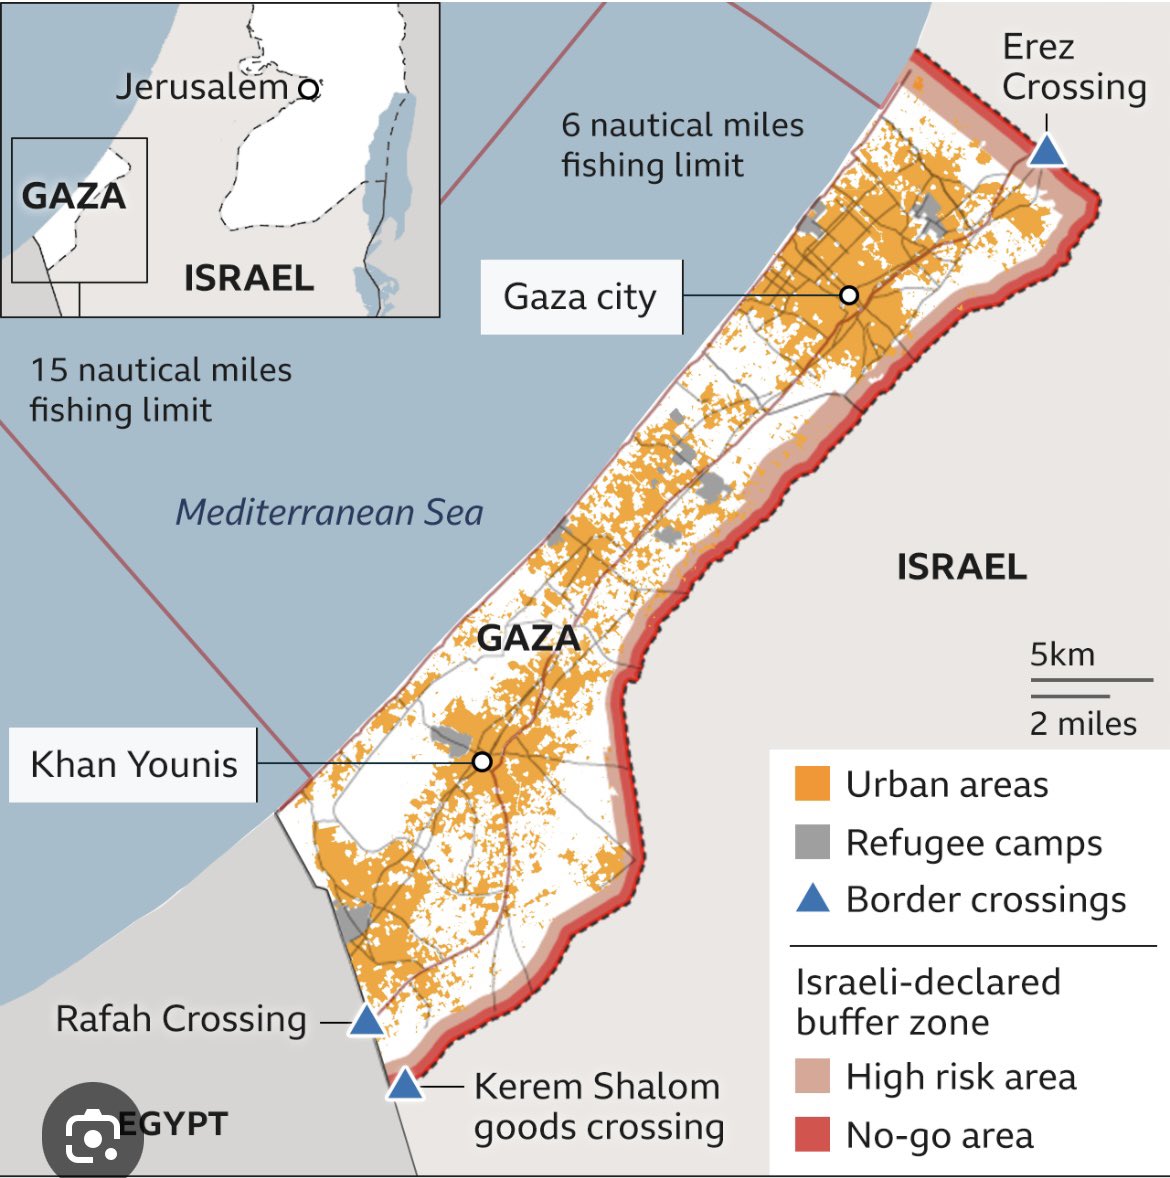 UN says Israel wants 1.1m Gazans to move in next 24 hrs It says it’s been told by Israel that everyone in Nth Gaza shld go south In last hr, Israeli military has directly told civilians of Gaza City to evacuate UN says it will lead to ‘devastating humanitarian consequences’